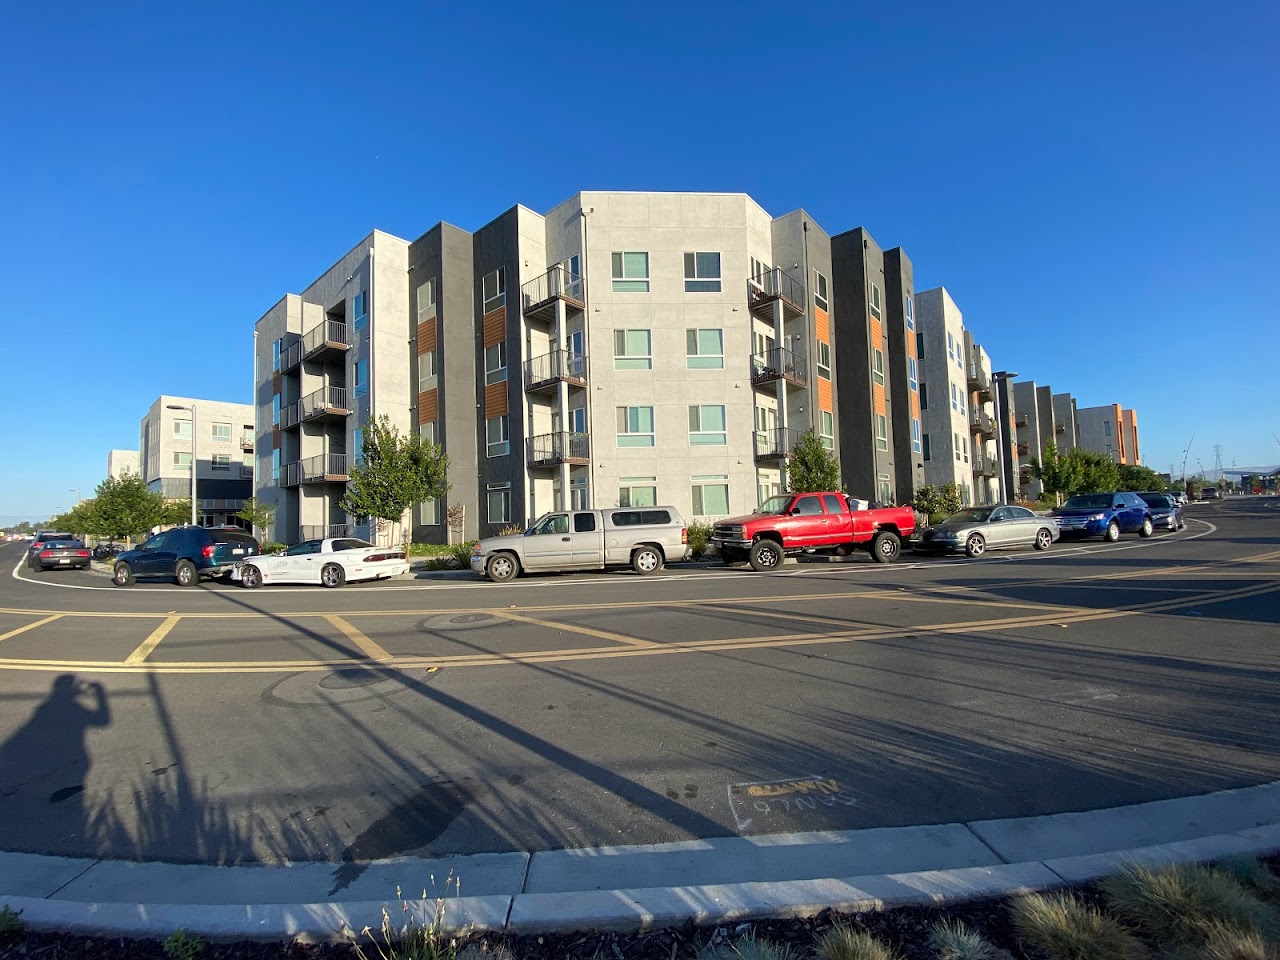 Photo of INNOVIA. Affordable housing located at 3051 QUANTUM DRIVE FREMONT, CA 94538